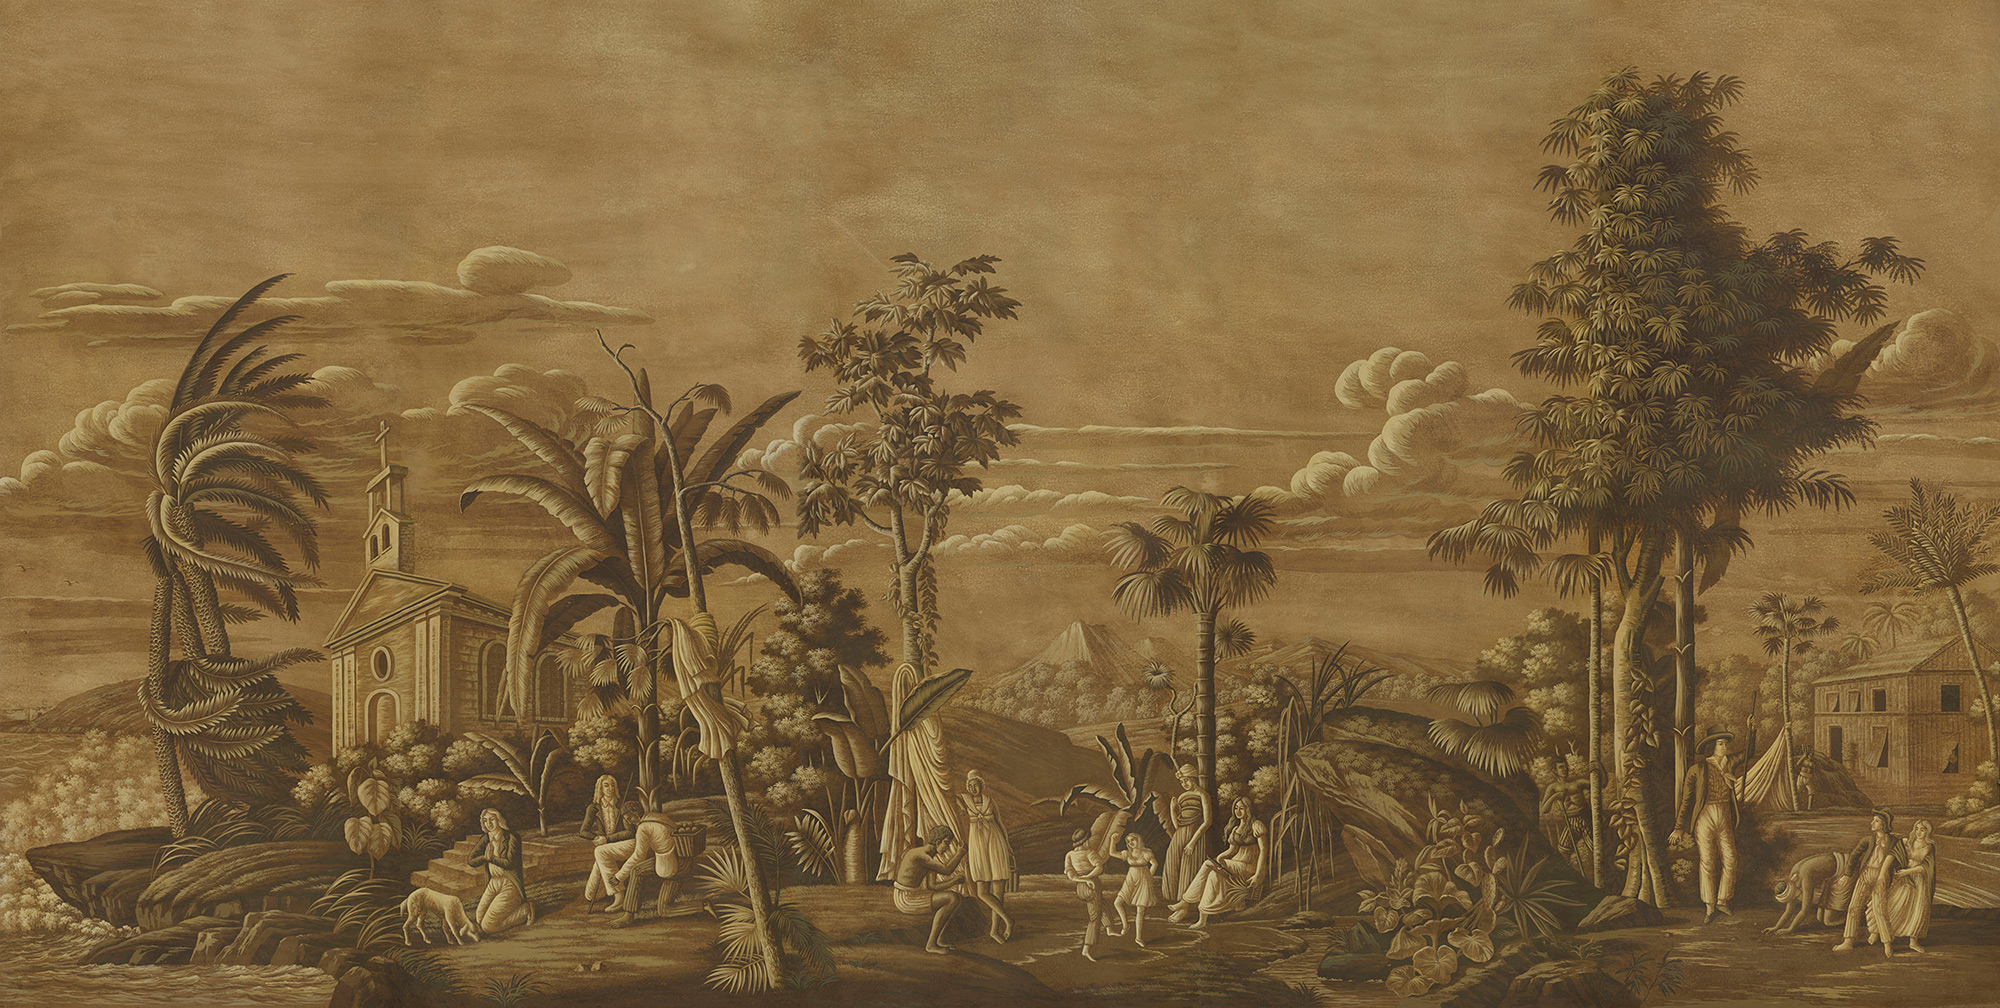 Sepia on antique scenic Xuan paper